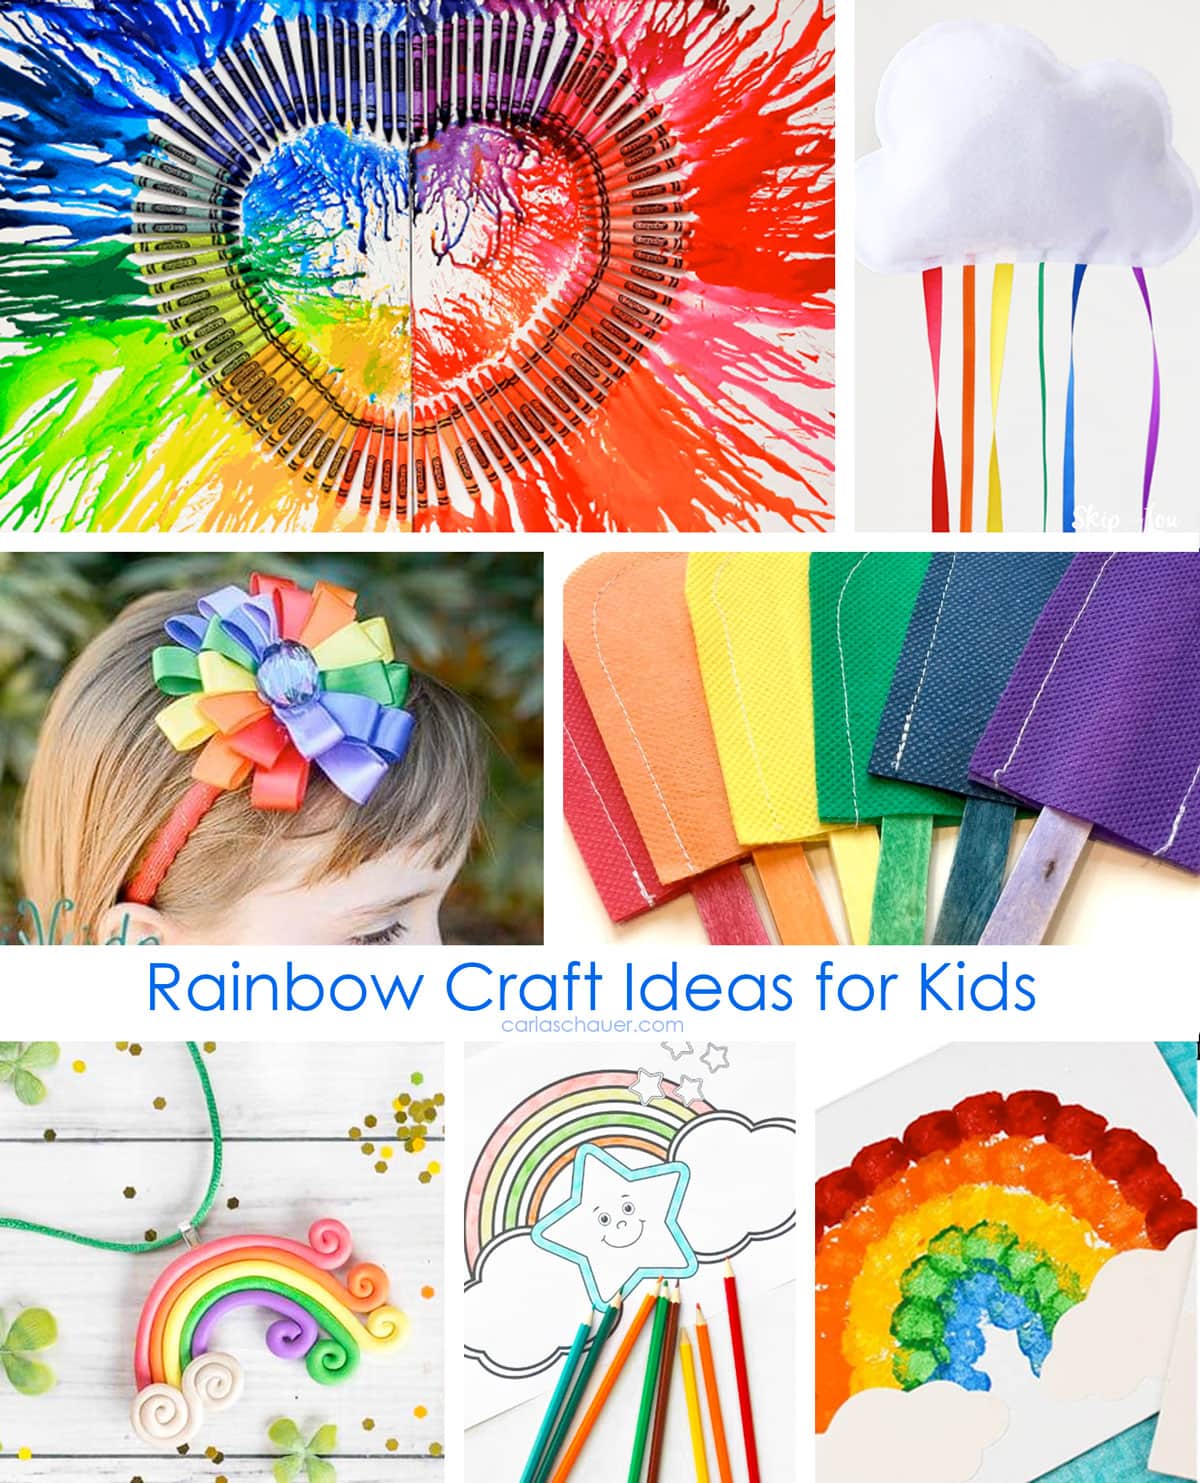 Rainbow Crafts for Kids: 51 Ideas to Make